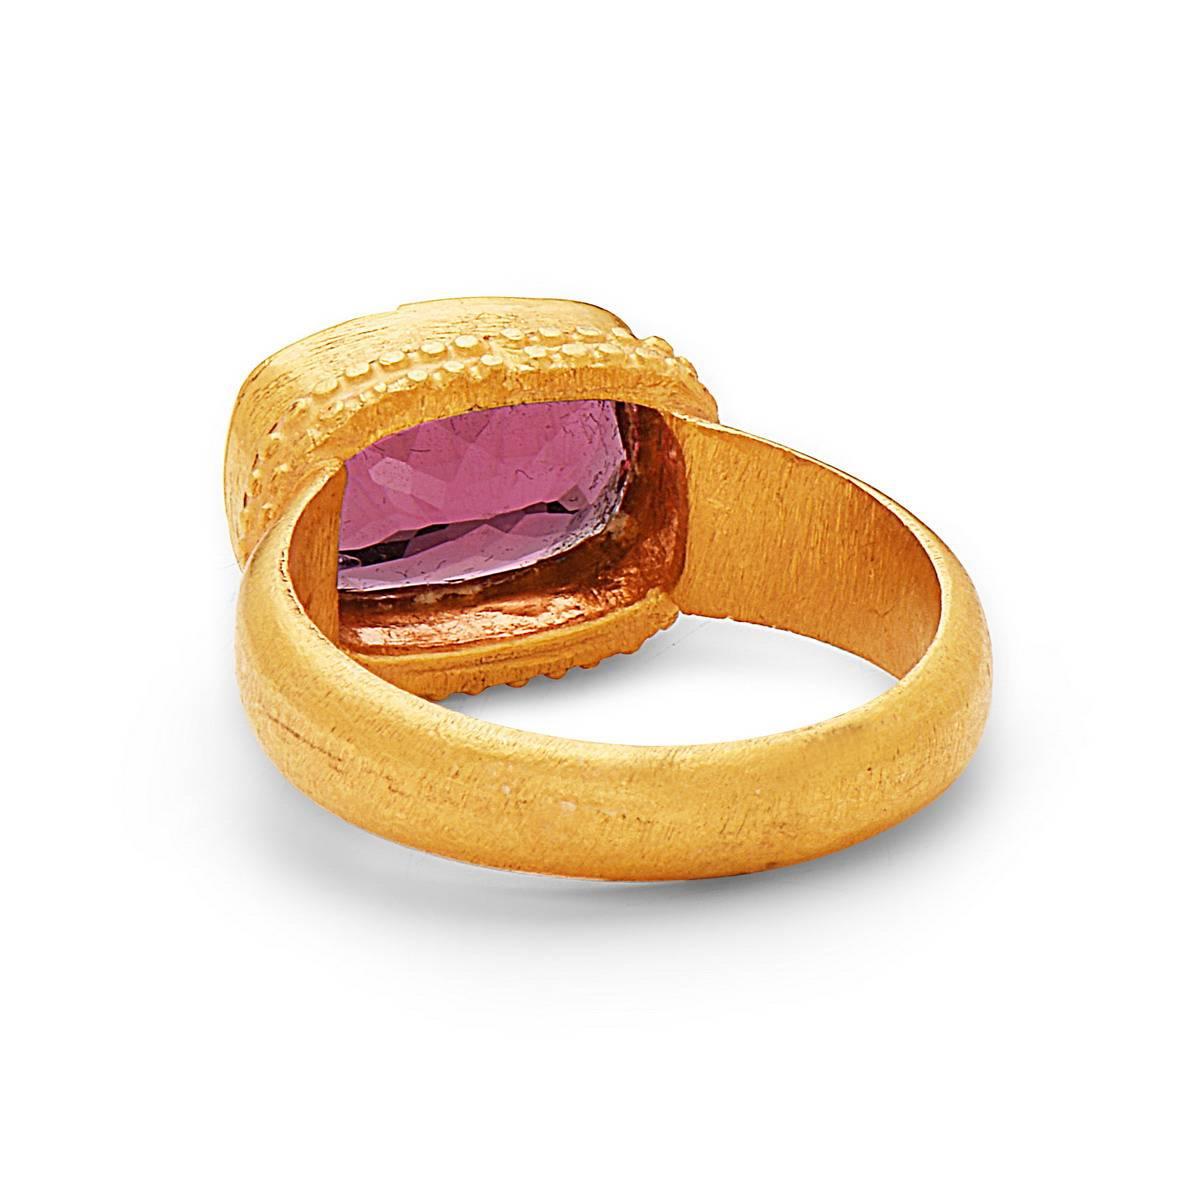 Simple yet charismatic Pink Tourmaline Ring in22K Yellow Gold. 

Ring size: 7 ( Can be sized )

22kt: 8.86gms
Pink Tourmaline: 5.35cts

